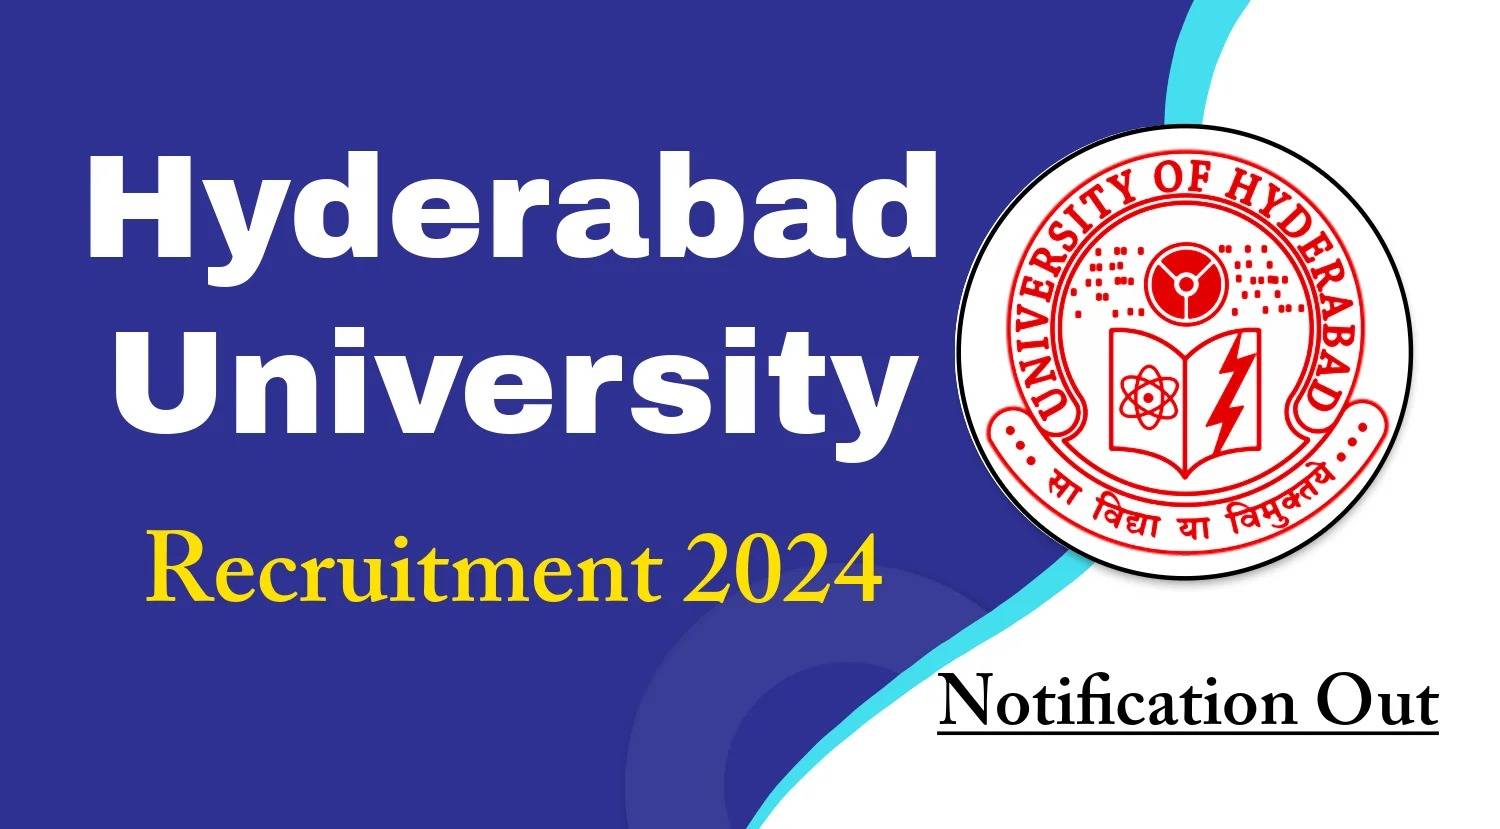 University of Hyderabad Recruitment 2024: Notification Released, Apply Now